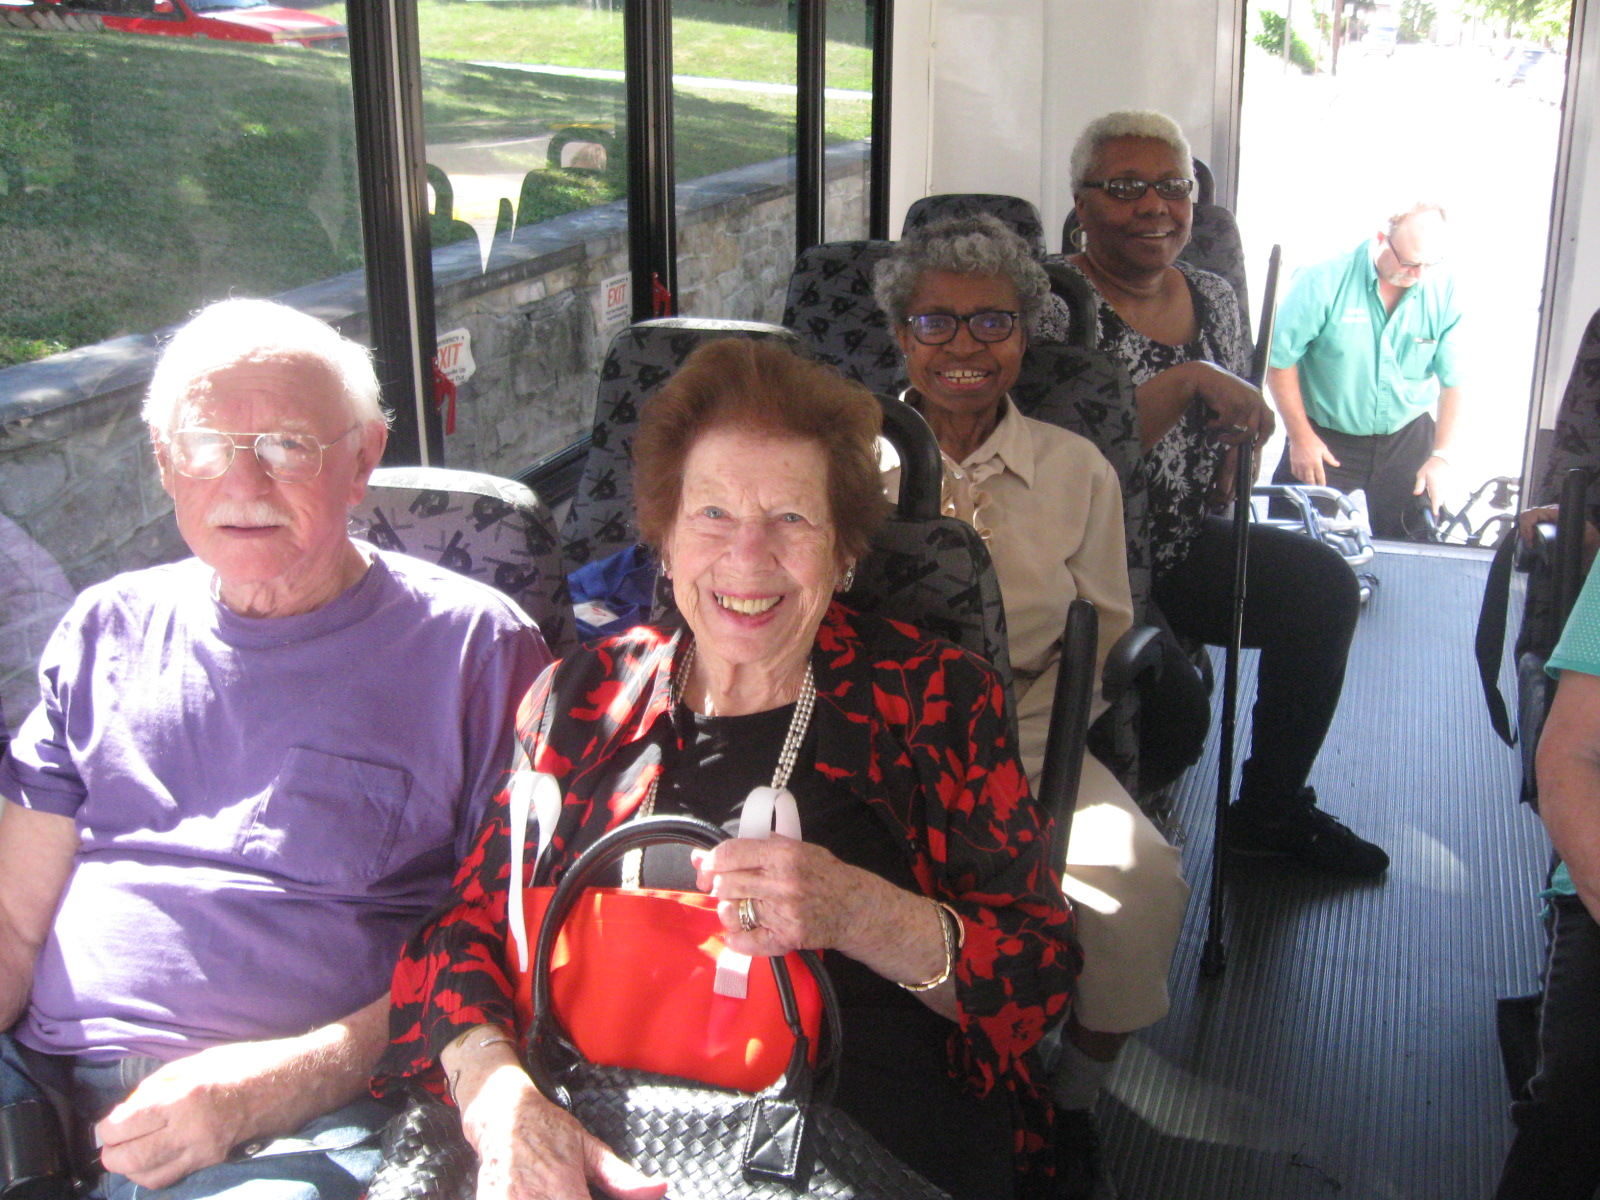 Three women and one man sit smiling in a bus.